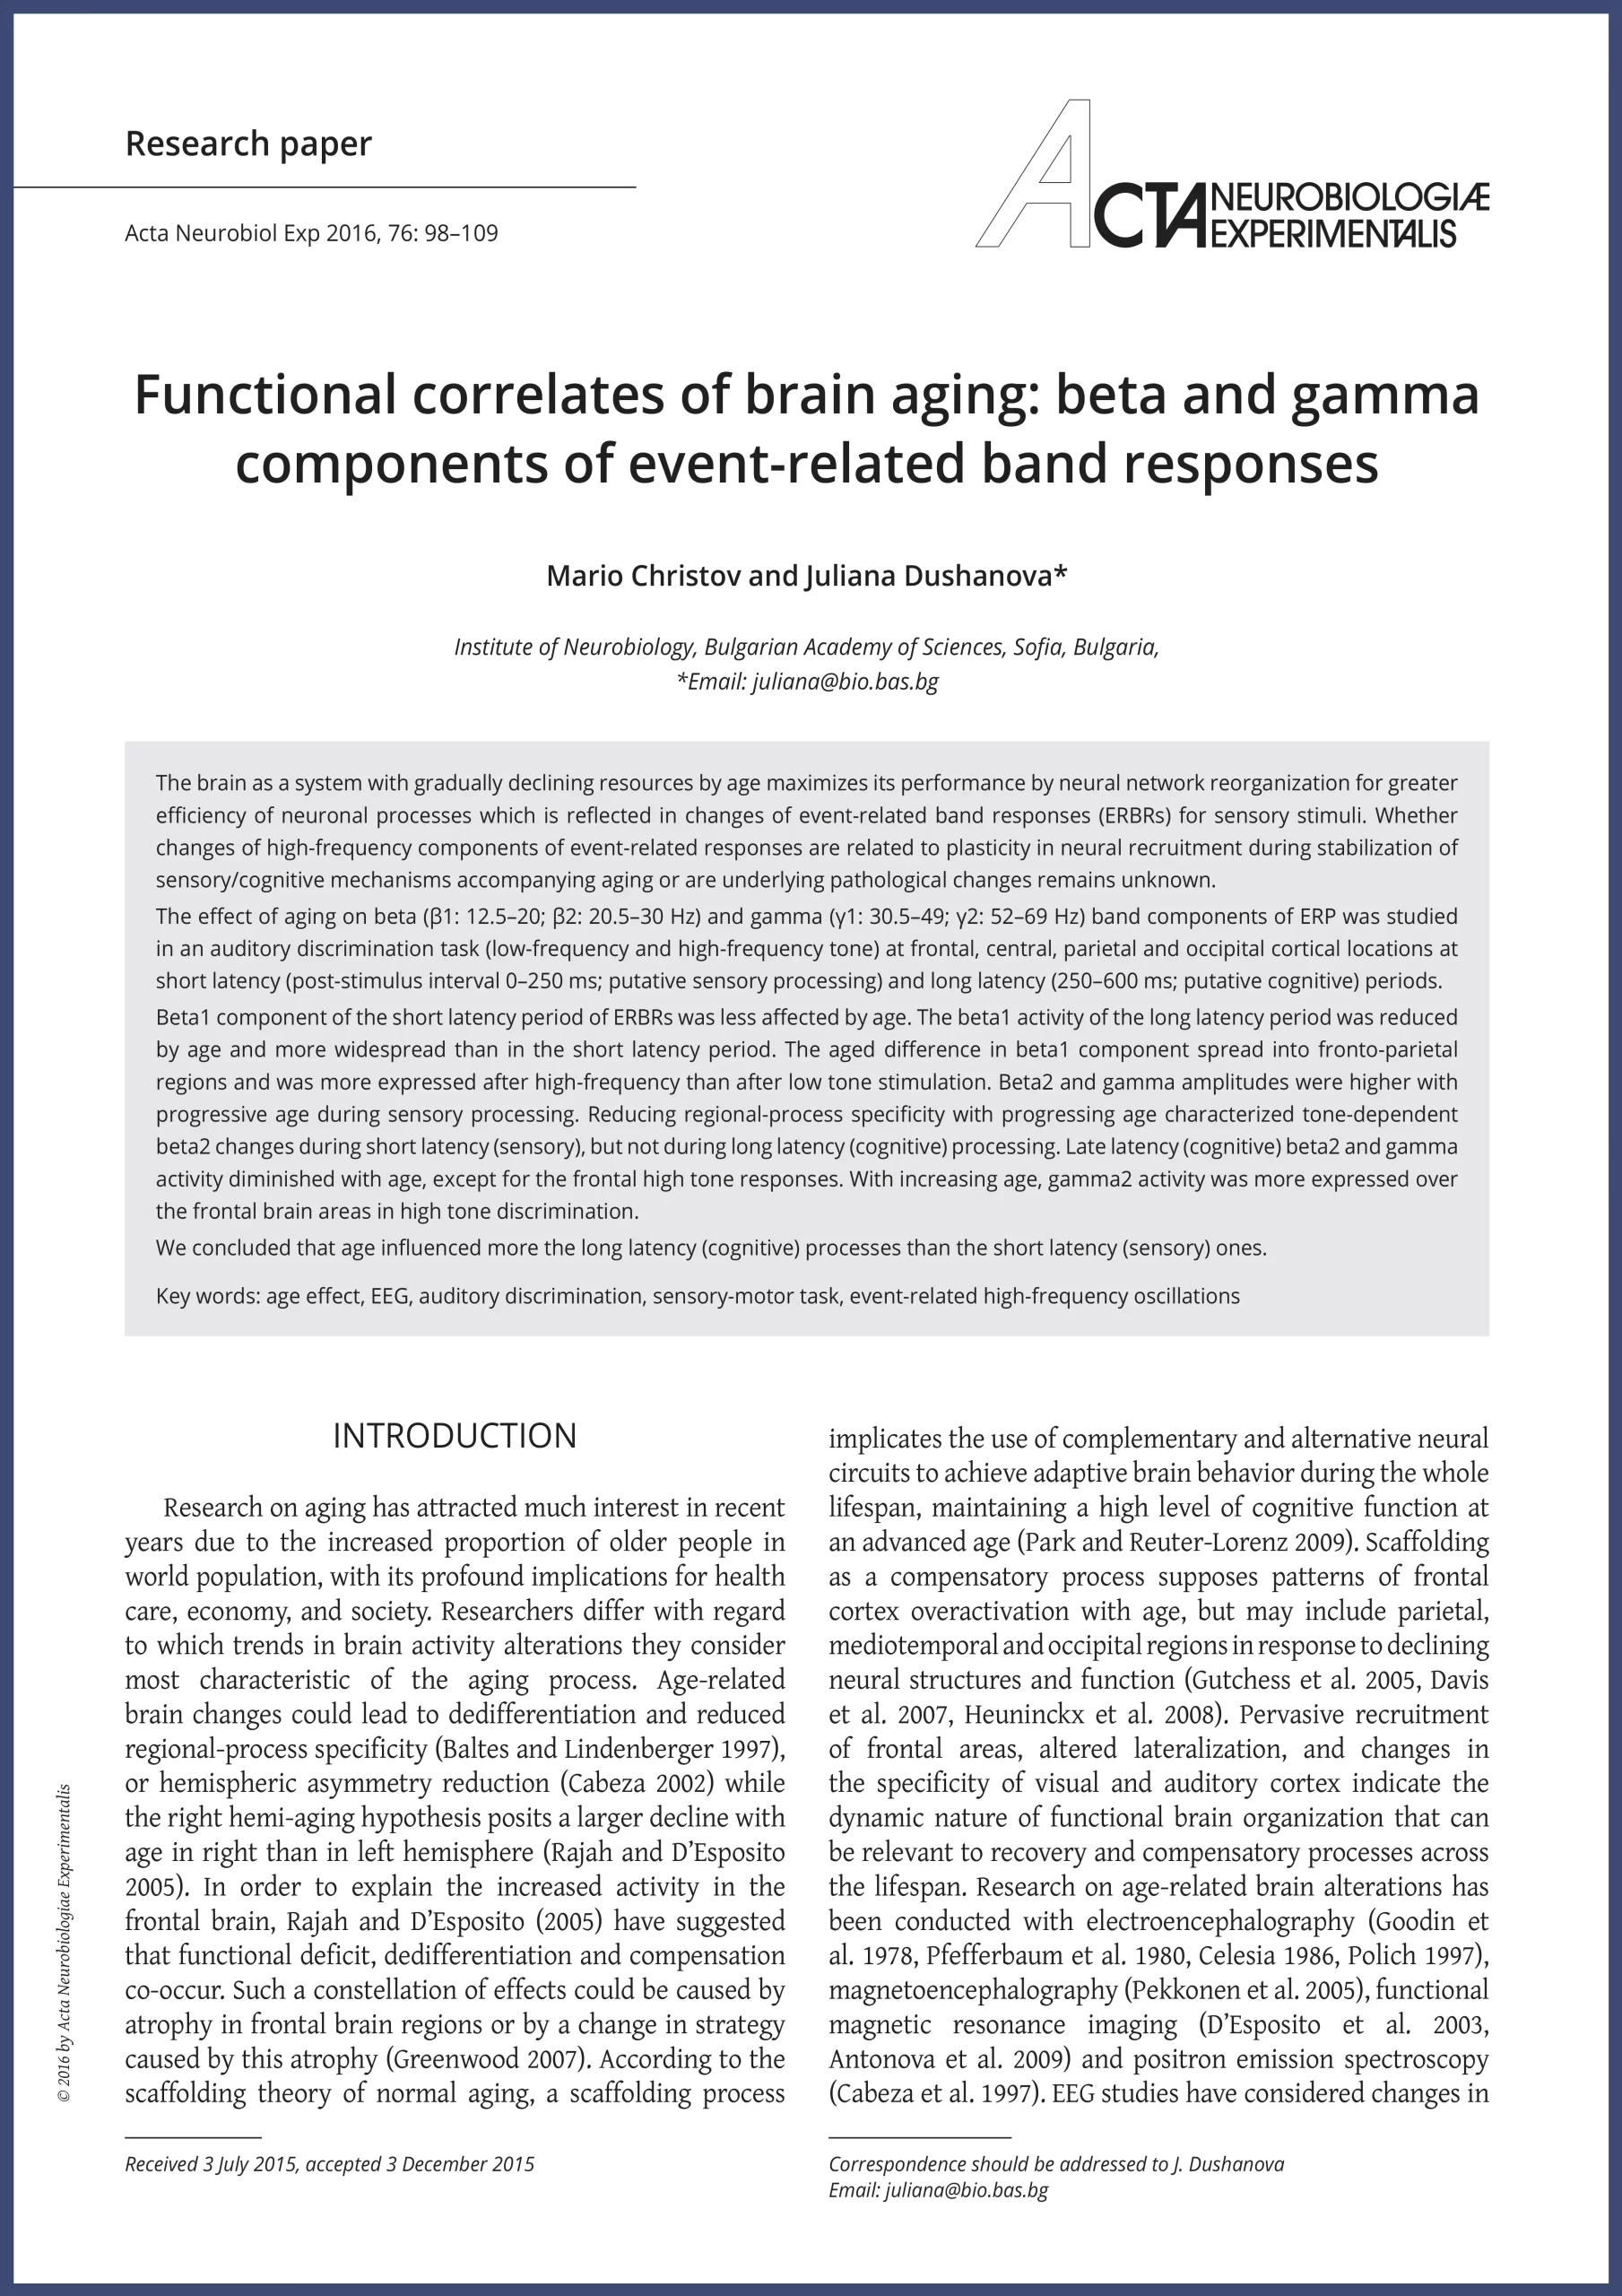 Christov Functional correlates of brain aging: beta and gamma components of event-related band responses publication